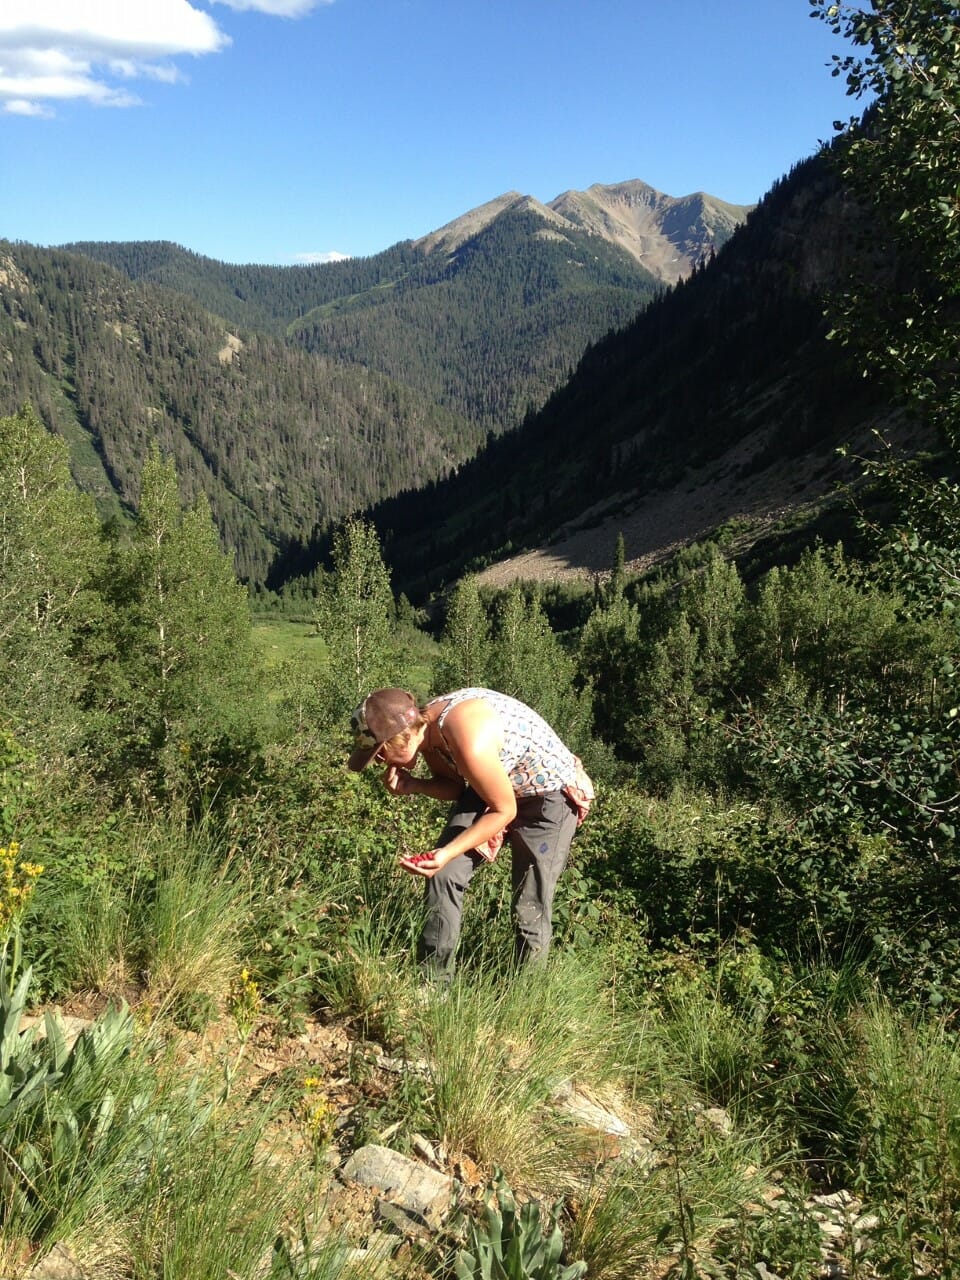 A woman picks berries in the Colorado high country.